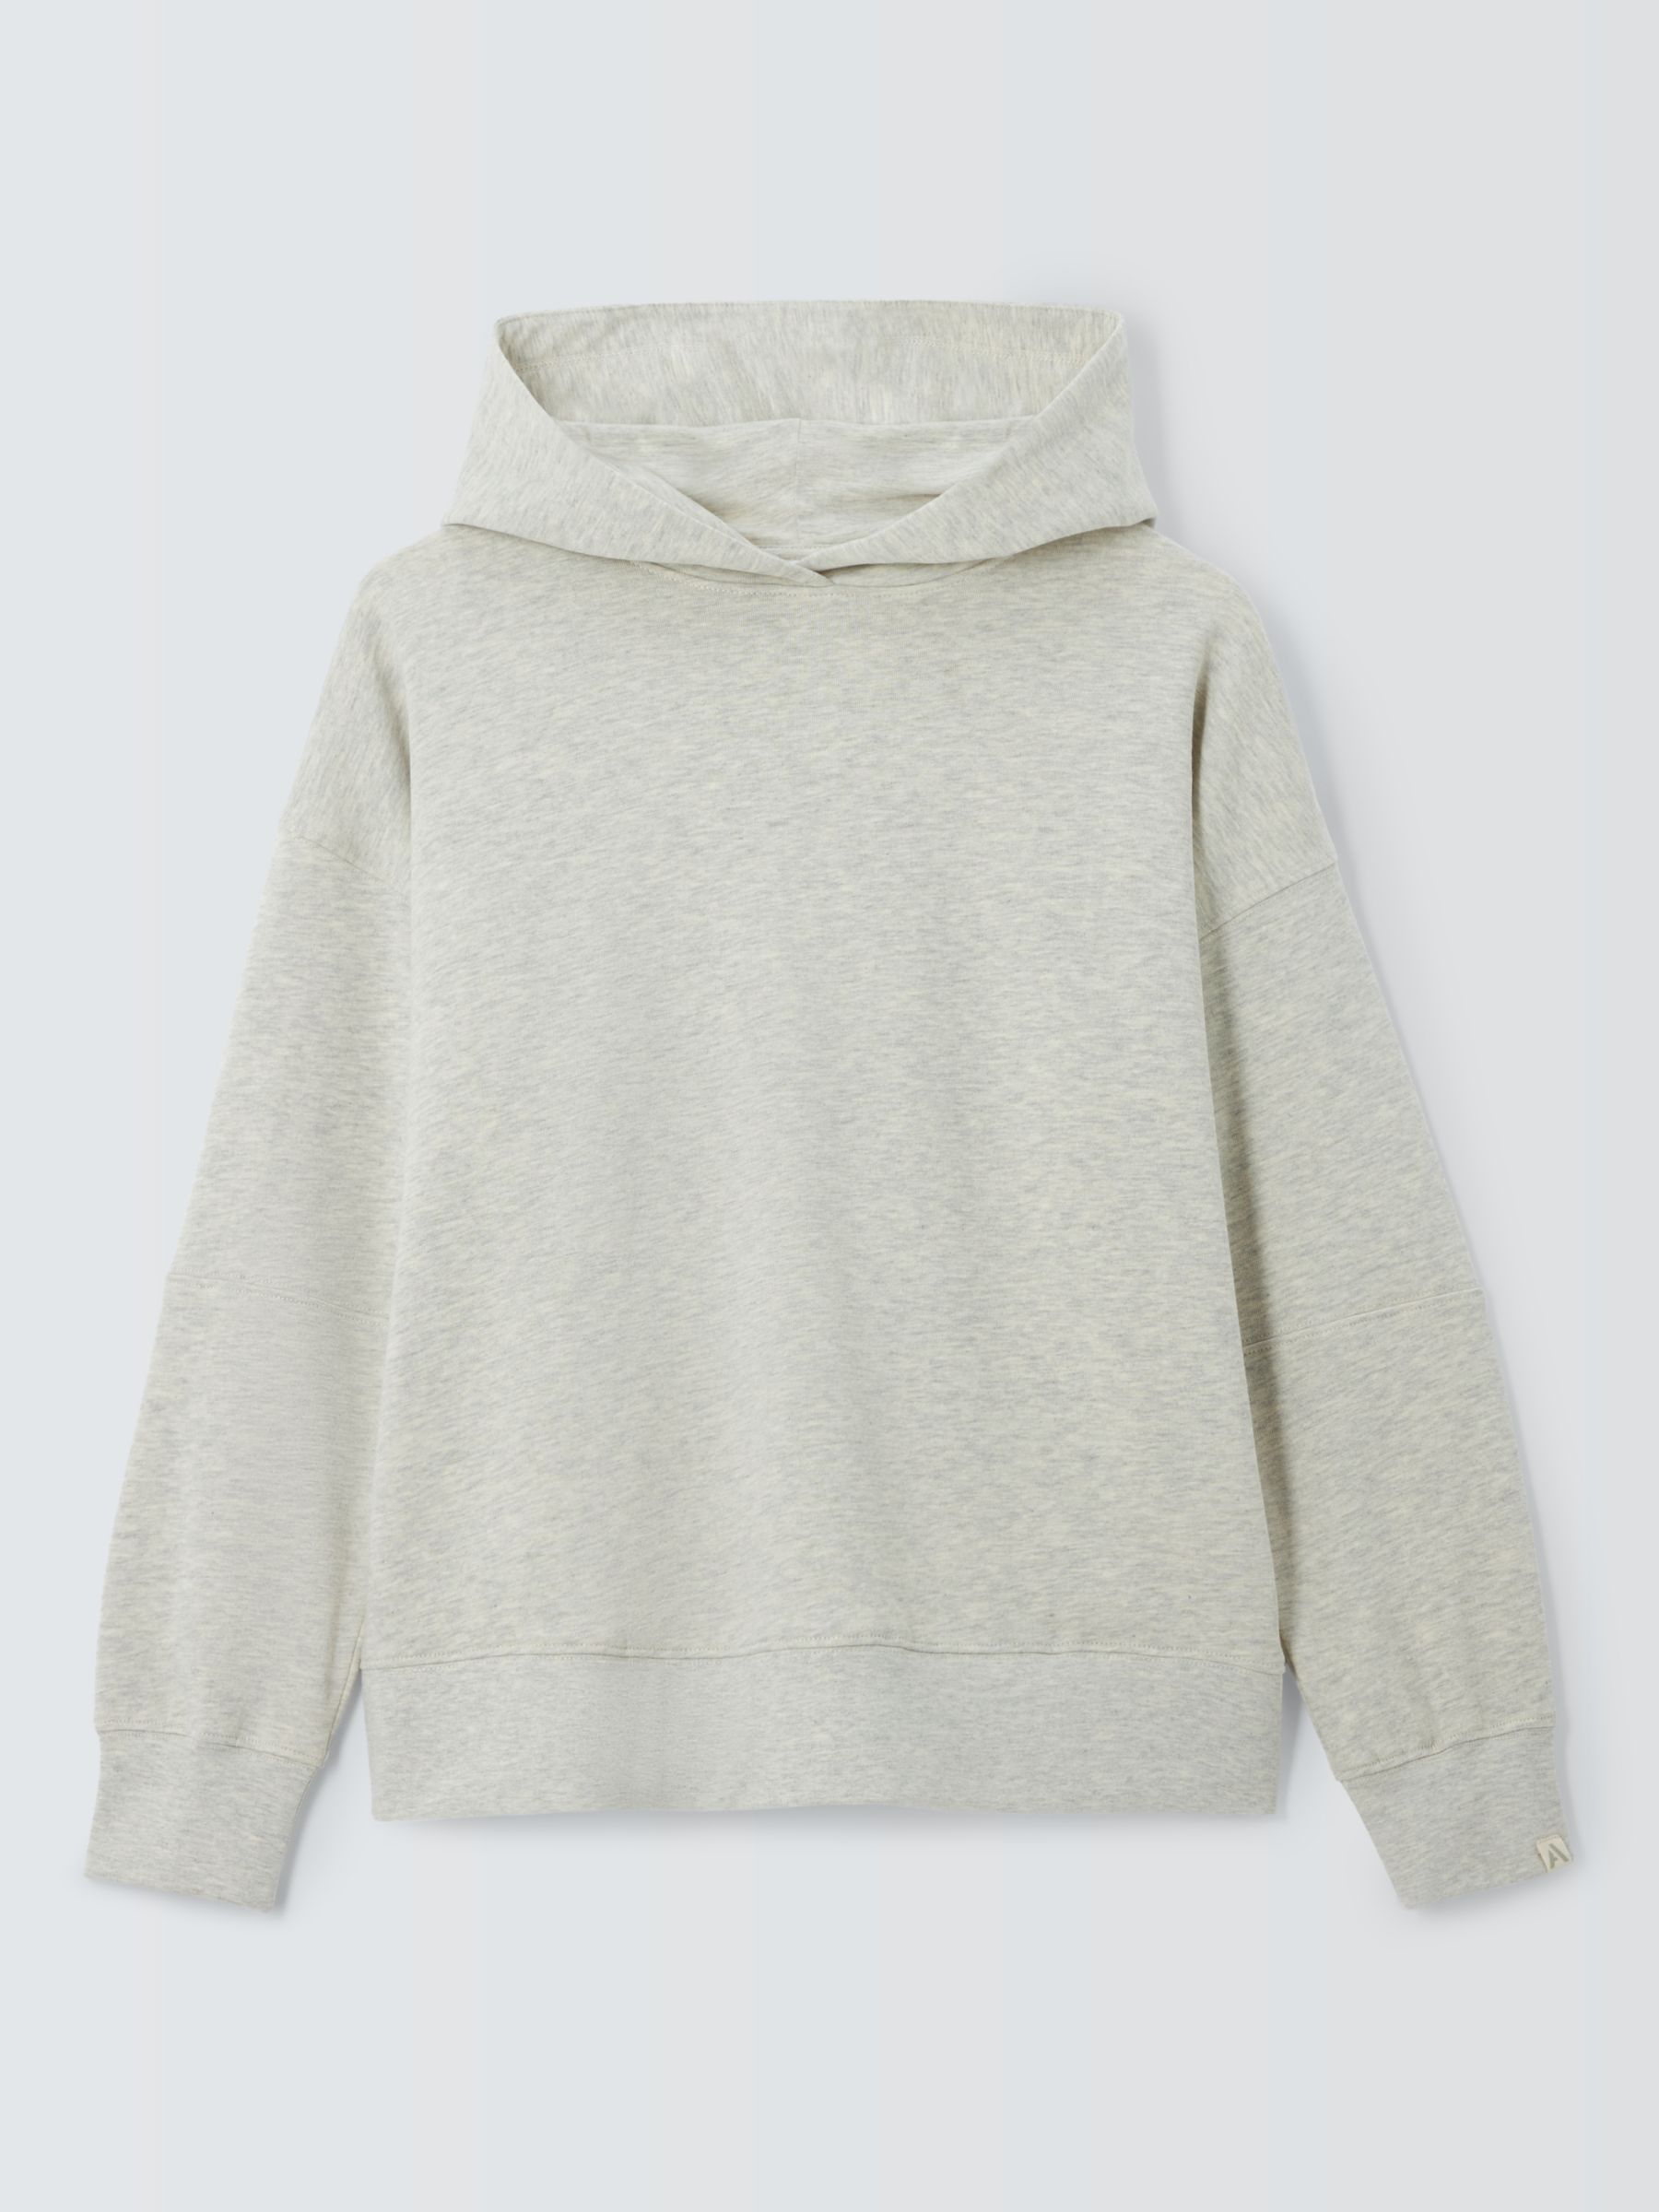 John Lewis ANYDAY Marl Jersey Hoodie, Oatmeal, XL